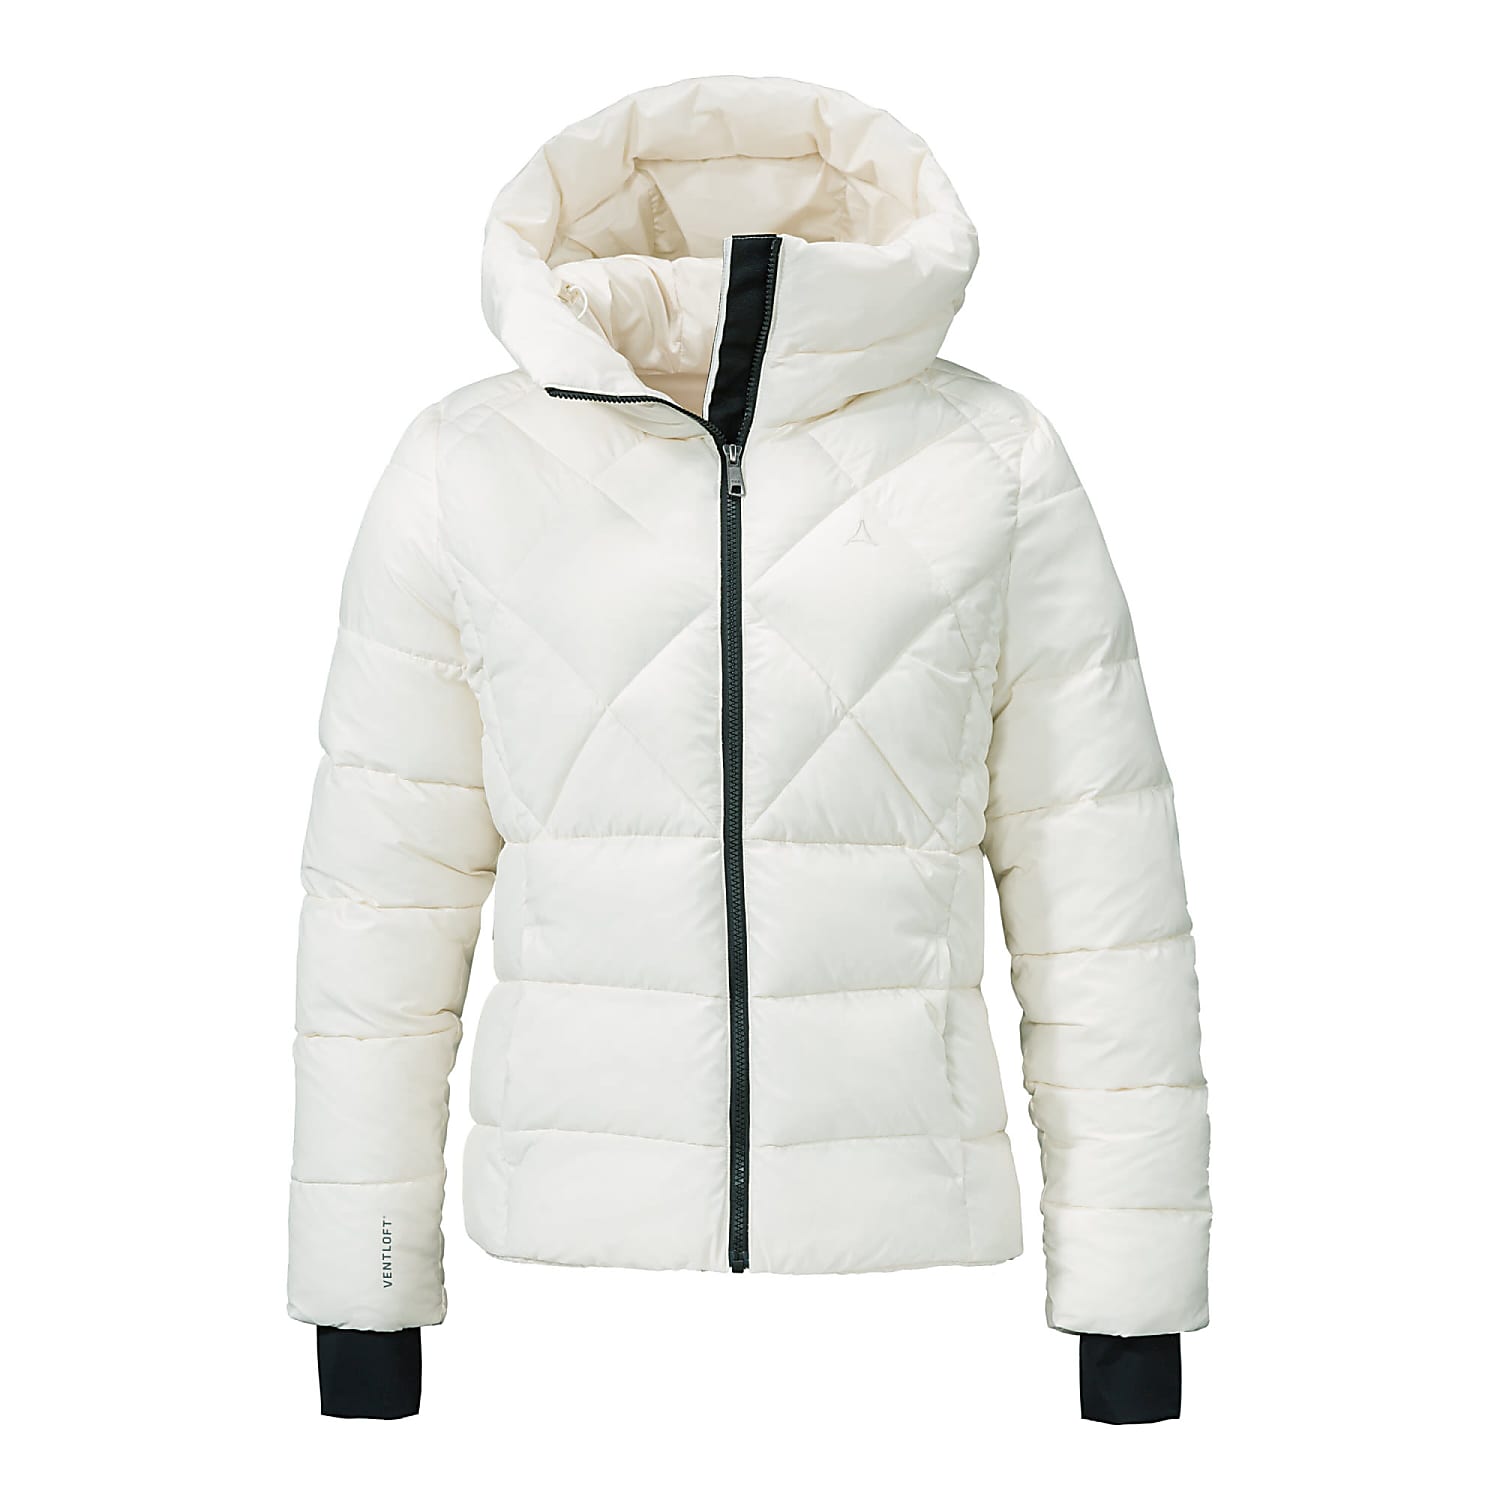 cheap INSULATED Whisper W White Schoeffel - shipping JACKET and Fast BOSTON,